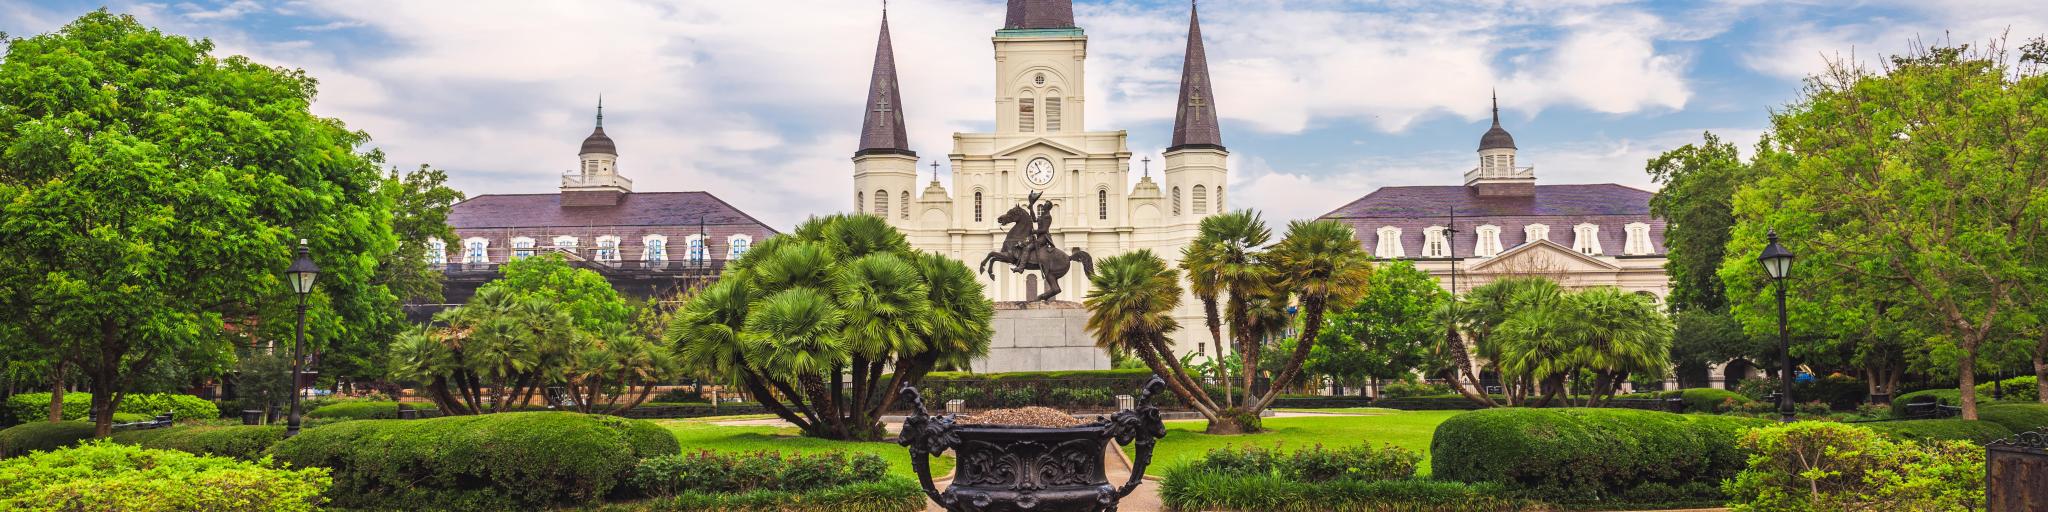 New Orleans, Louisiana, USA at Jackson Square and St. Louis Cathedral in the morning on a sunny day.